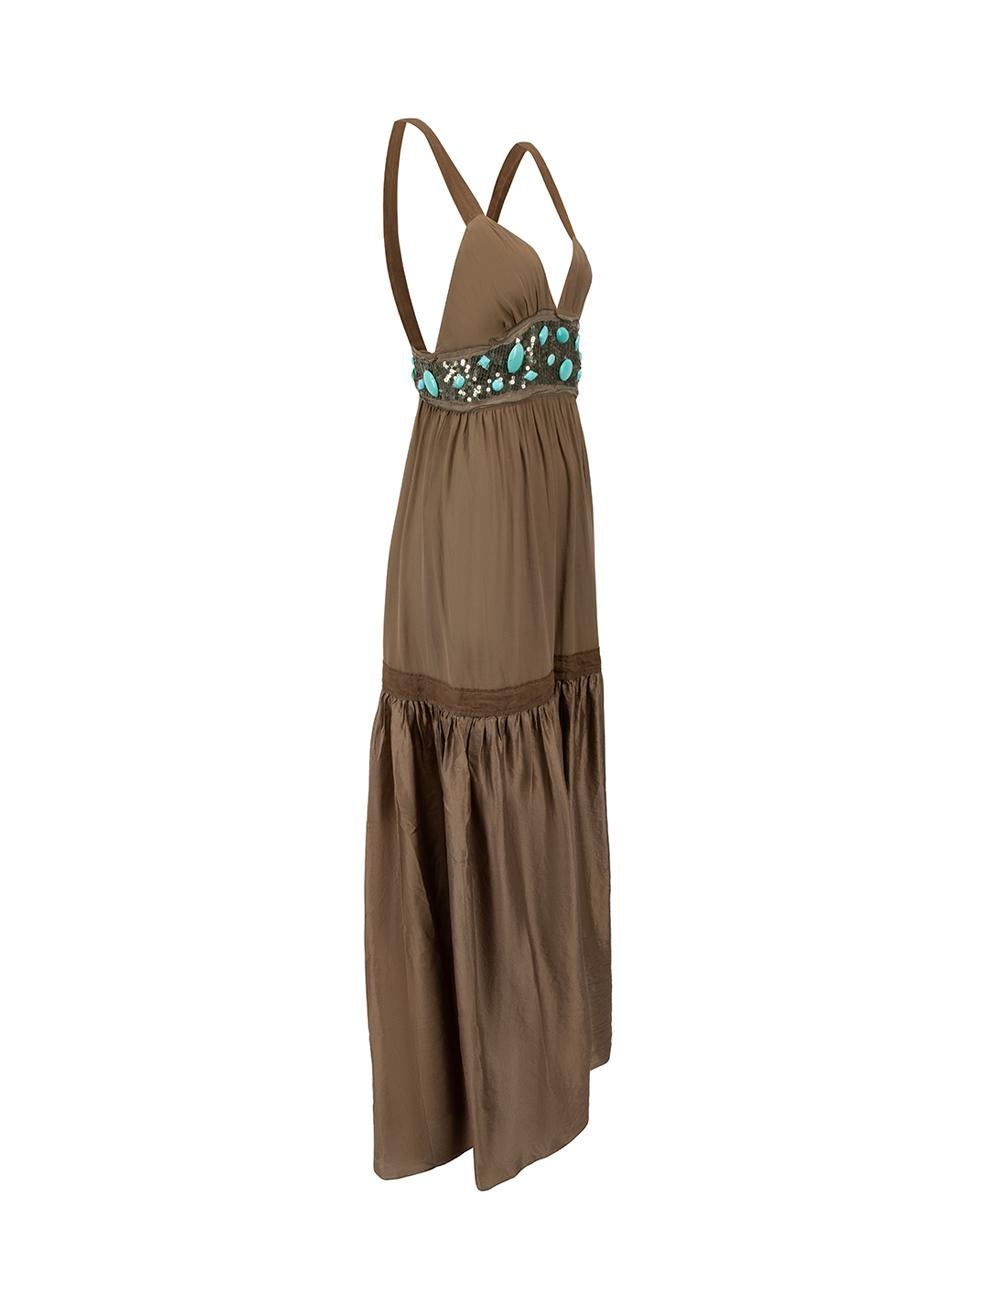 CONDITION is Very good. Minimal wear to dress is evident. Minimal wear to embellishment where one blue glass bead has been chipped on this used M Missoni designer resale item.



Details


Brown

Silk

Maxi dress

V neckline

Beaded and sequin